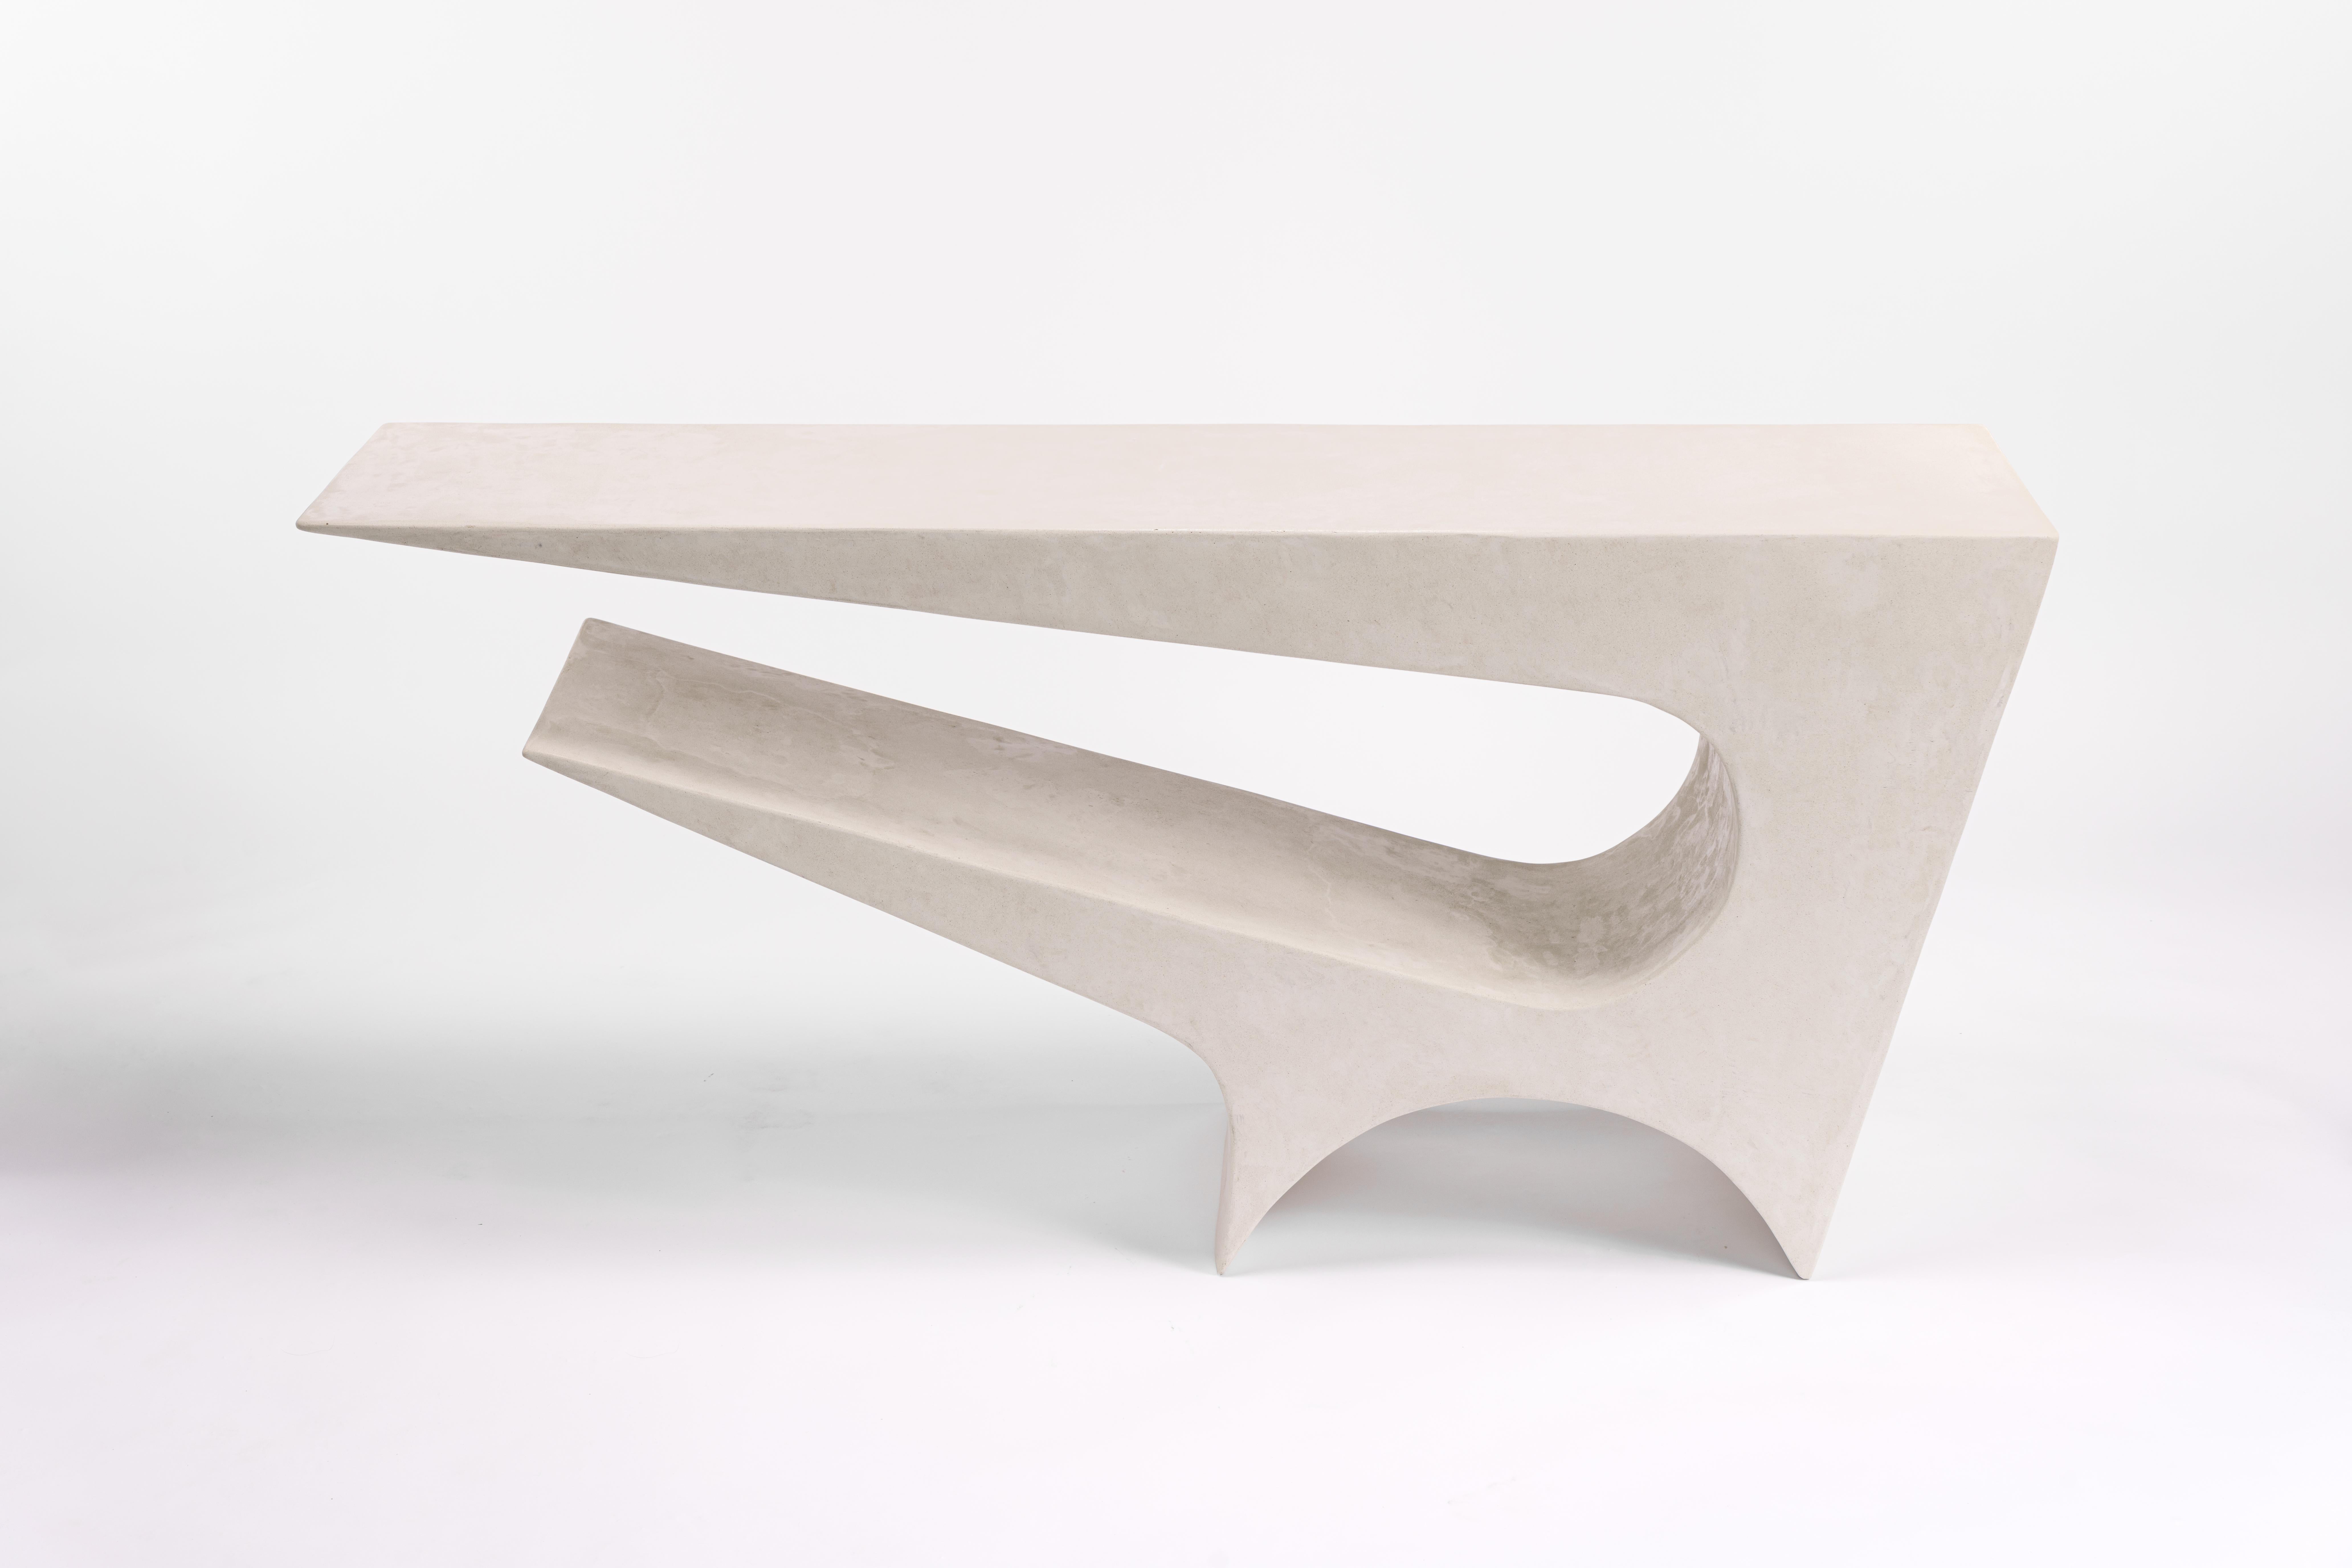 Star Axis Console Table in Polished Concrete by Neal Aronowitz For Sale 5